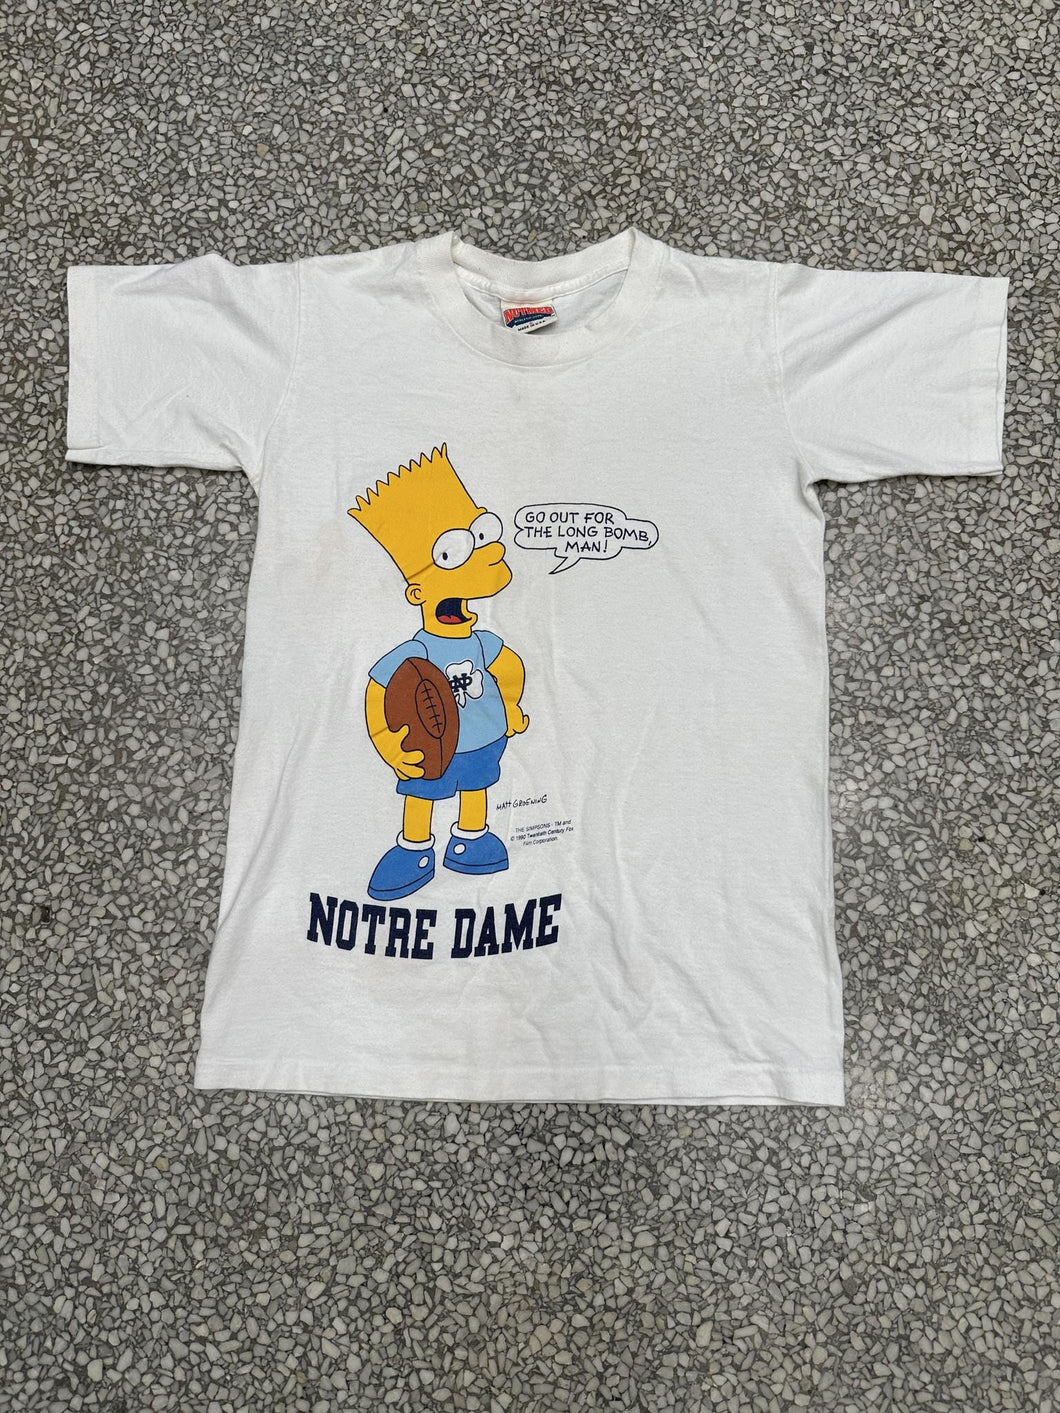 Notre Dame Vintage 90s Bart Simpson Go Out For The Long Bomb Man Faded White ABC Vintage 